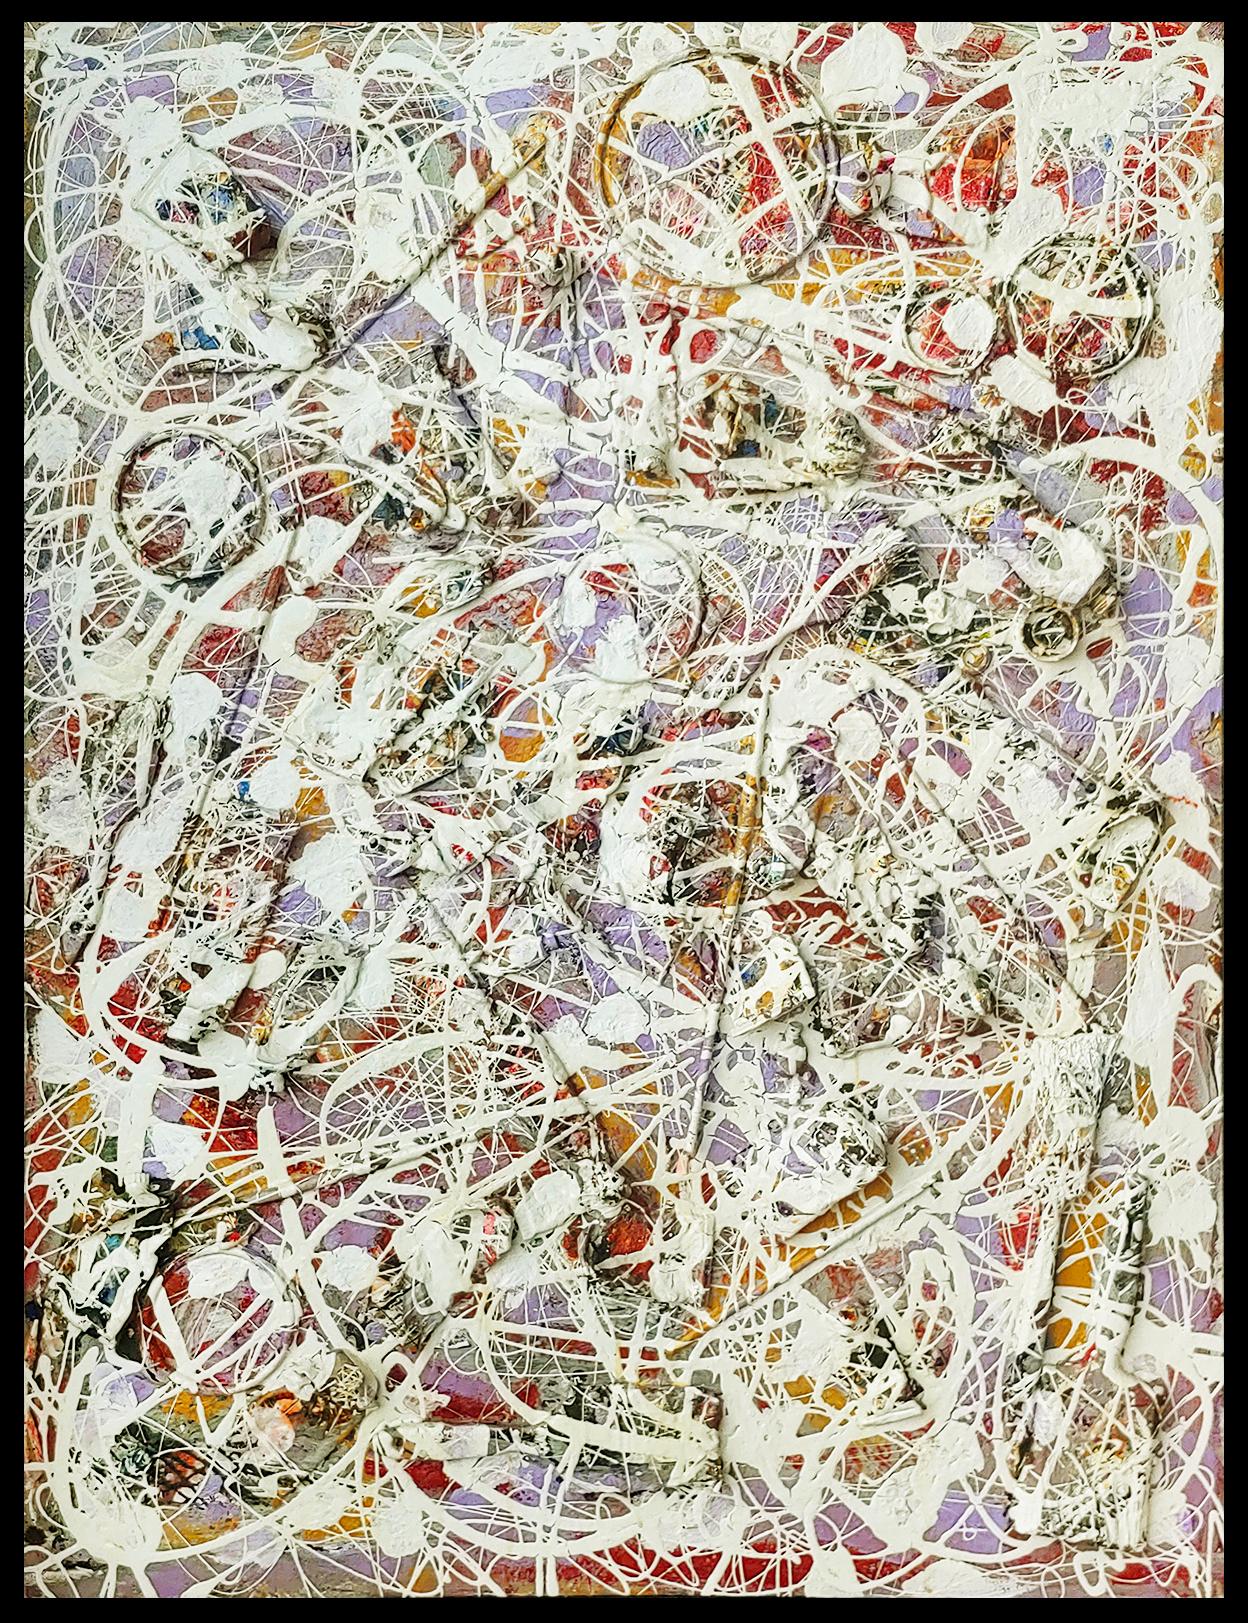 Harald Marinius Olson Abstract Painting - "Every Little Thing" Oil and everything else on canvas 